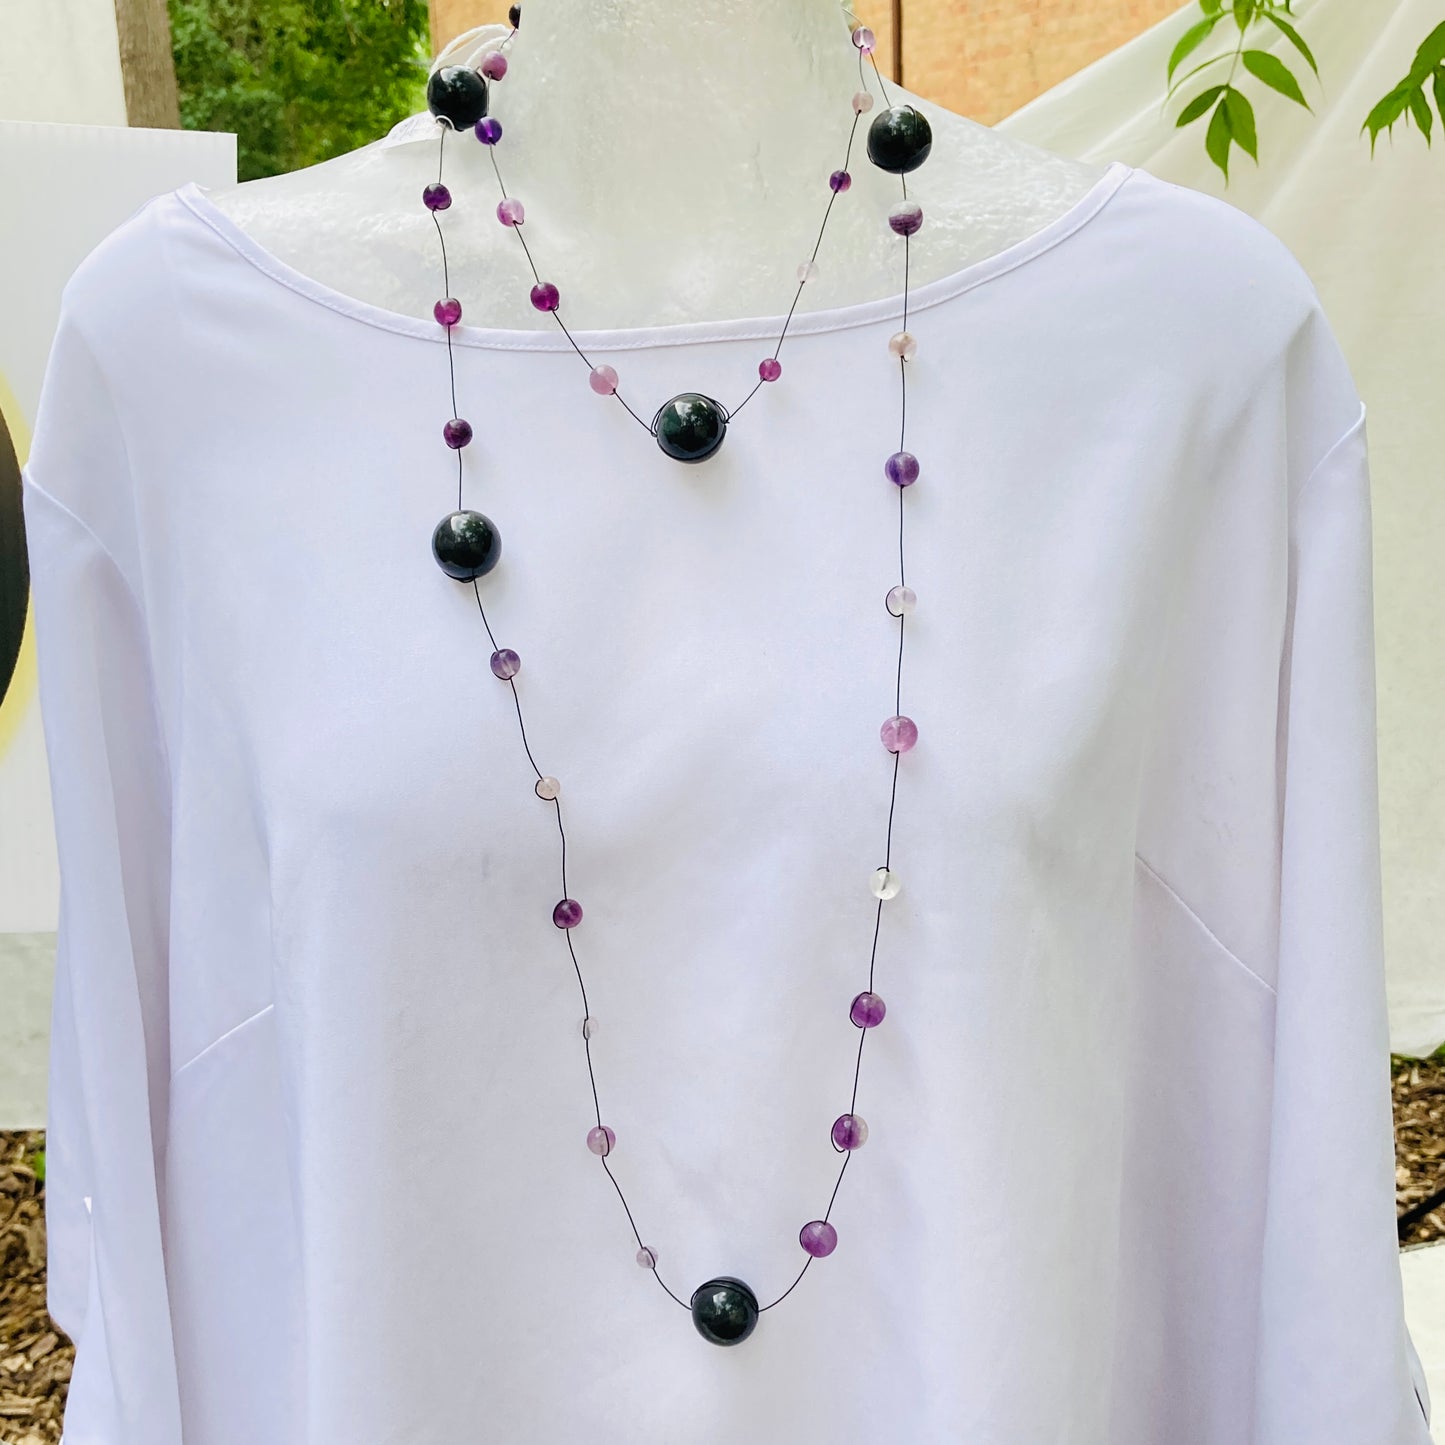 Calm Logic Natural Purple Fluorite Crystal Necklace with Rainbow Obsidian 60 inches